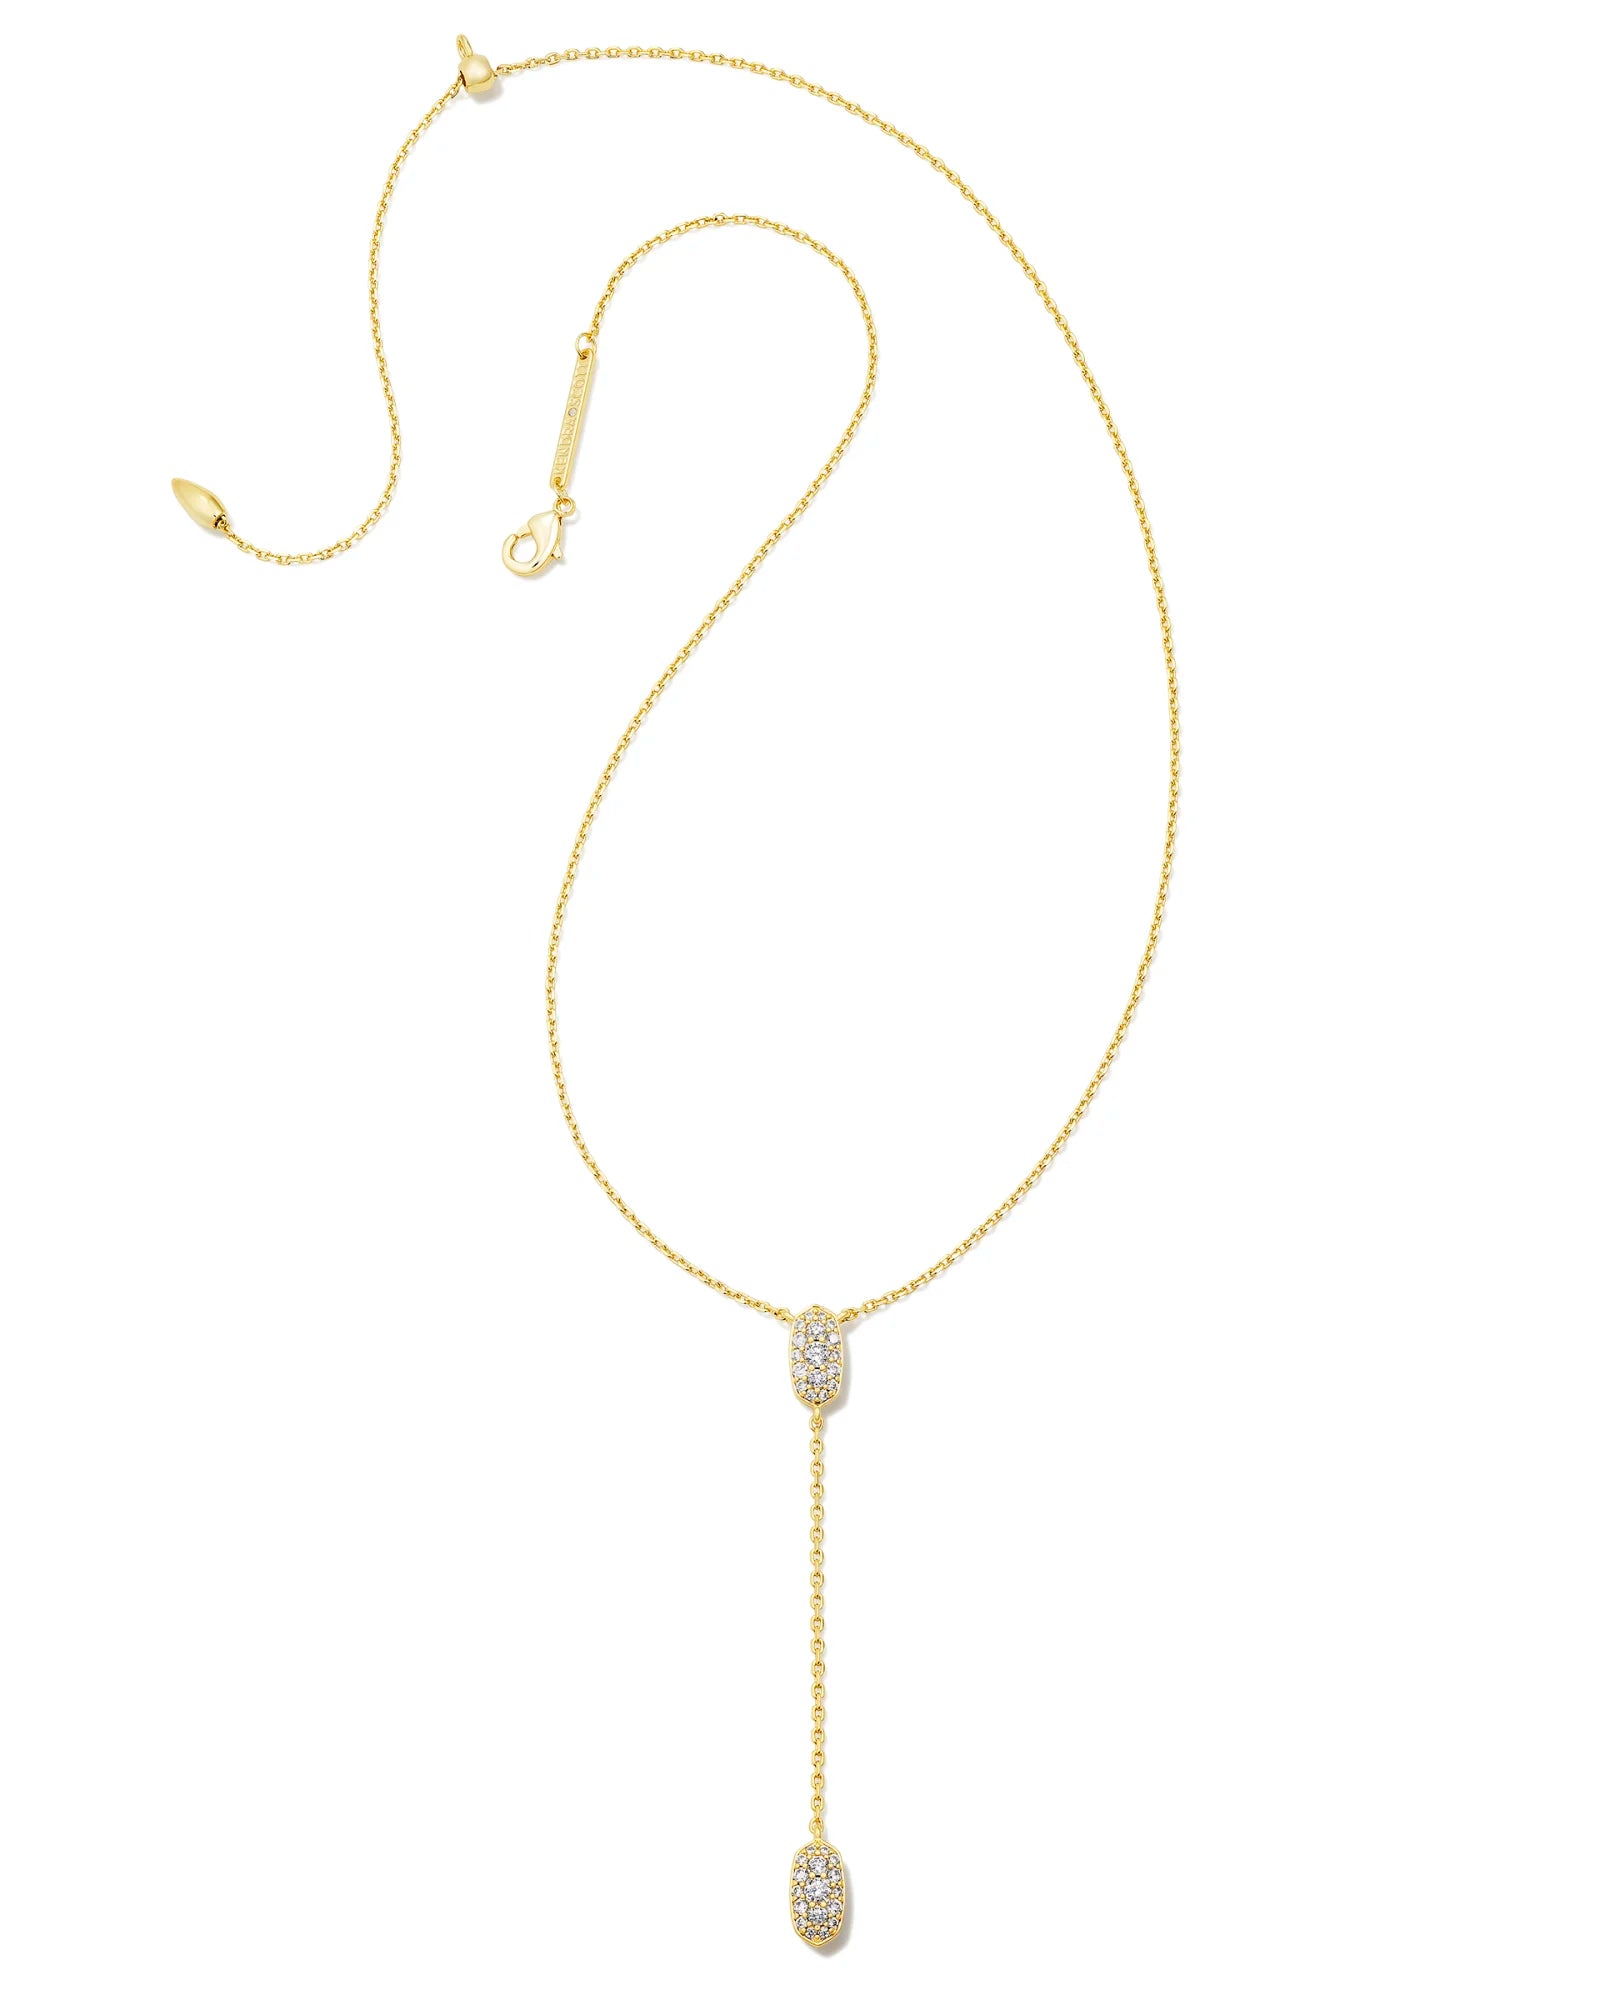 Kendra Scott Grayson Y Necklace Gold White CZ-Necklaces-Kendra Scott-N00328GLD-The Twisted Chandelier